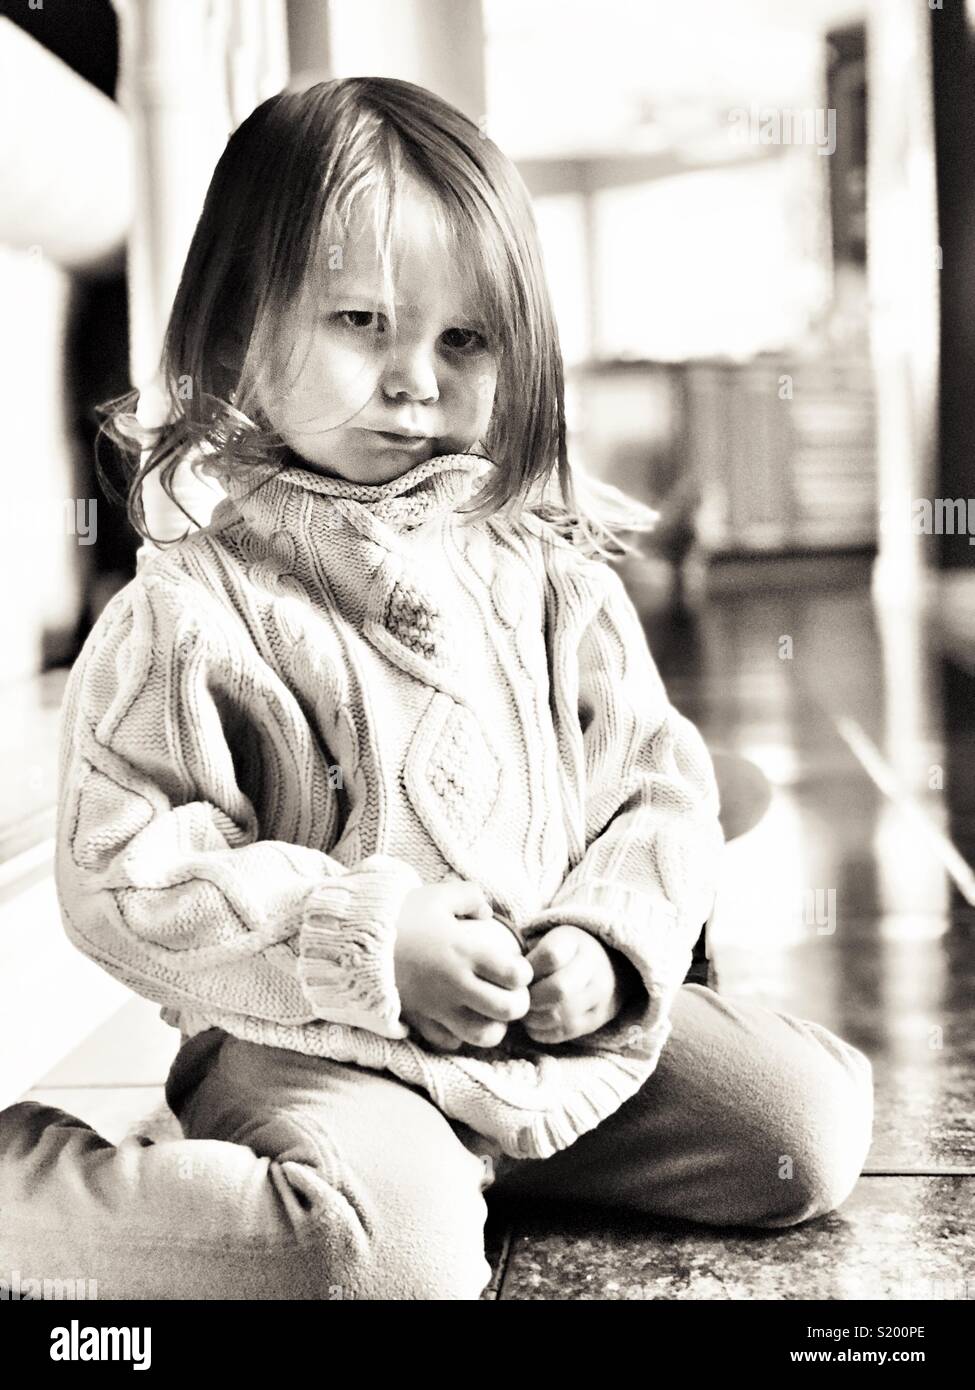 Black and white image of toddler girl looking sad and angry on tile floor with bright backlighting Stock Photo